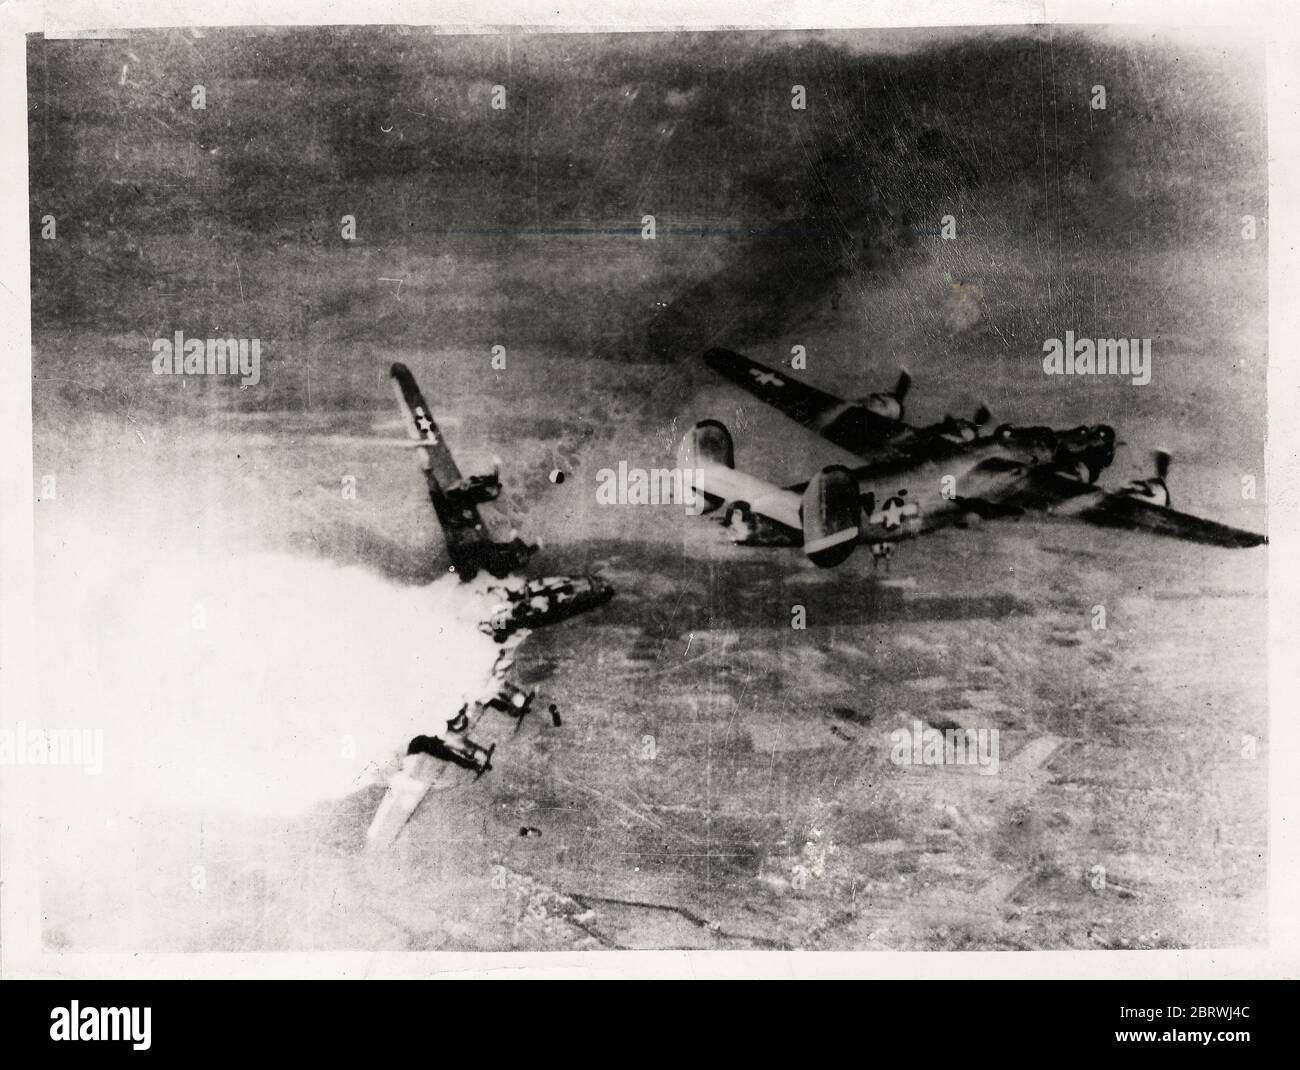 Vintage World War II photograph - B-24H Liberator bomber of 783rd Bomb Squadron, 465th Bomb Group, US 15th Air Force exploding in mid air after being hit by anti-aircraft fire over Germany, 1944 Stock Photo